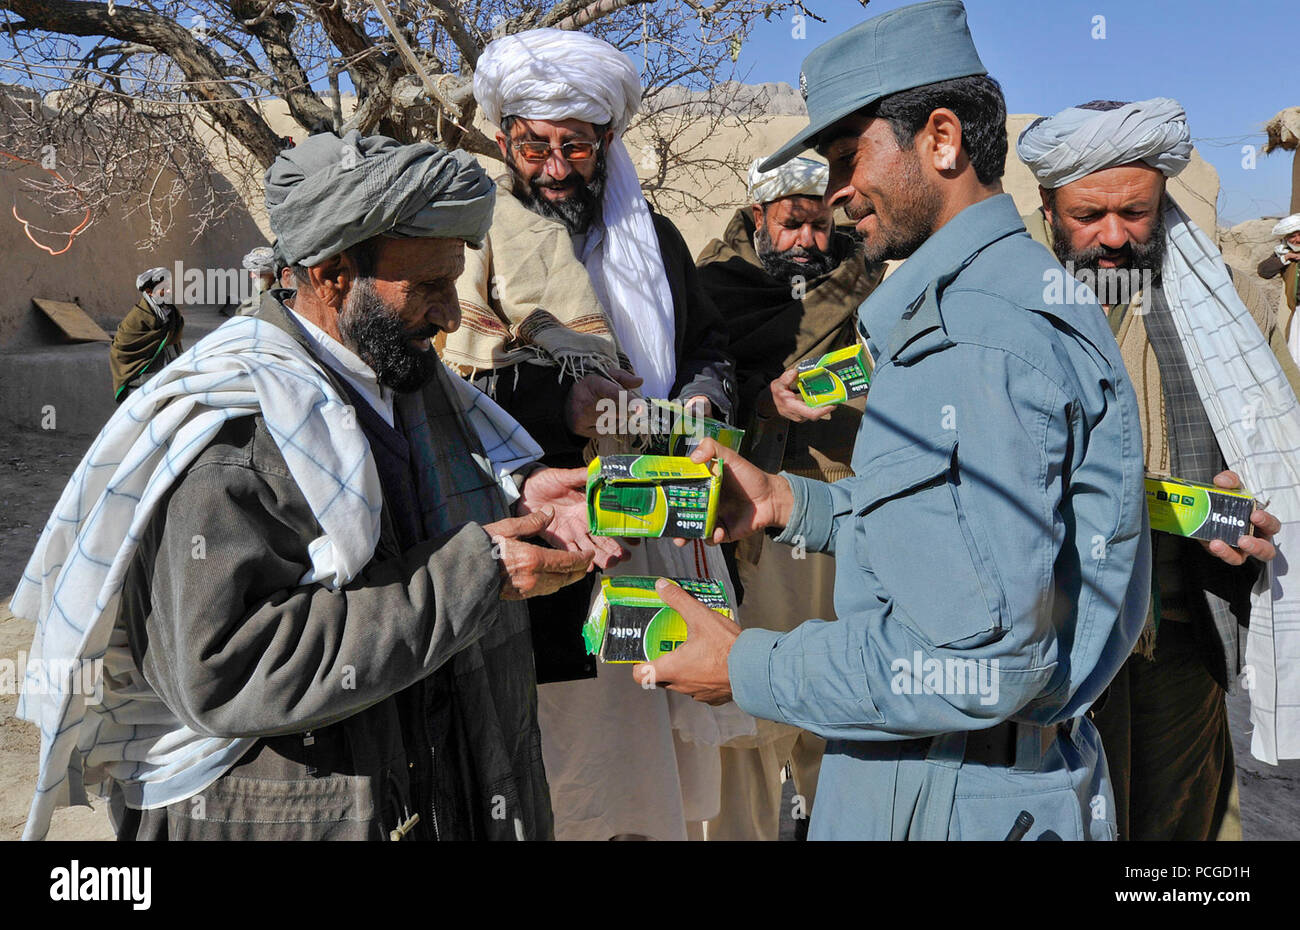 Afghan Uniformed Police distribute workbooks and radios to village elders in Walan Rabat, Zabul province, Afghanistan, Dec. 31. The items enable village children to participate in a locally broadcasted radio literacy program. Stock Photo